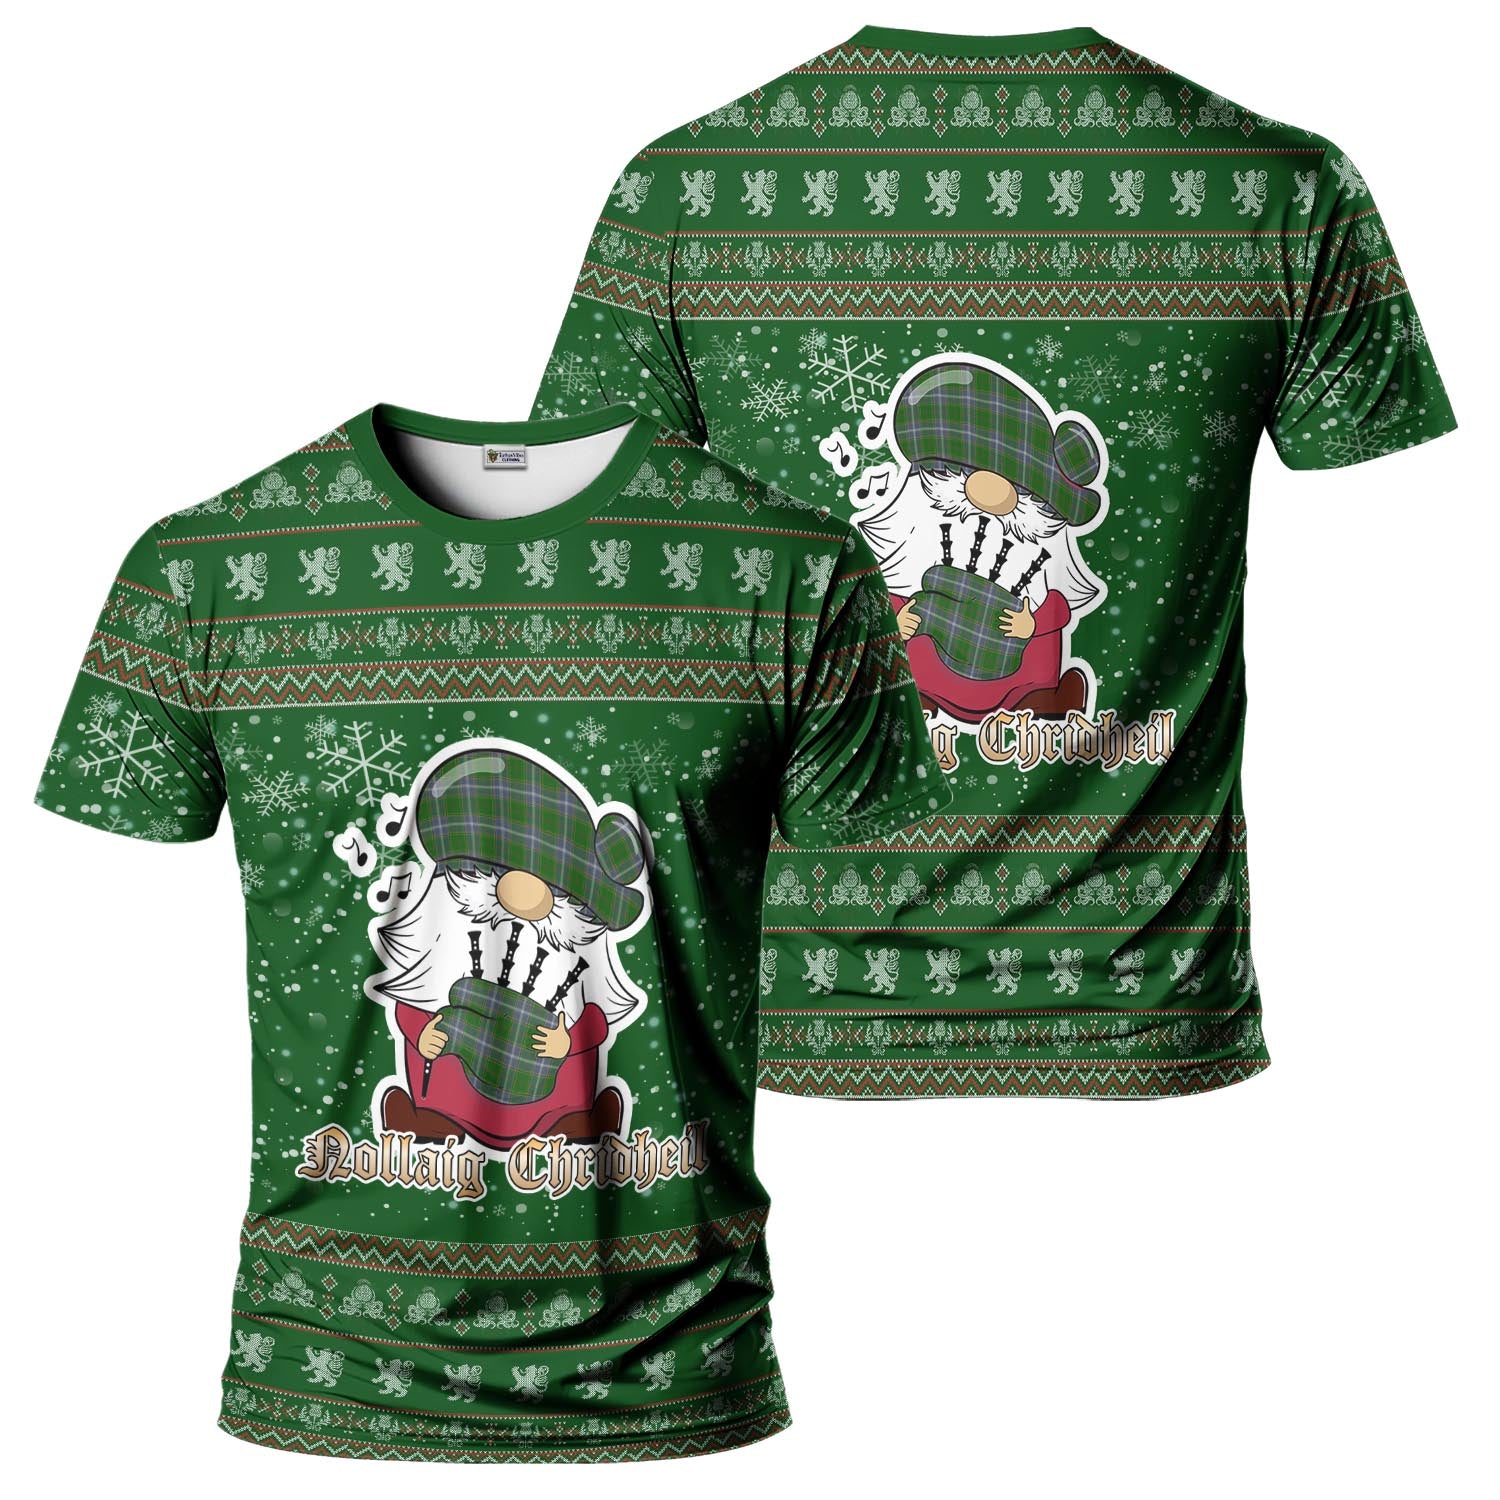 Pringle Clan Christmas Family T-Shirt with Funny Gnome Playing Bagpipes Men's Shirt Green - Tartanvibesclothing